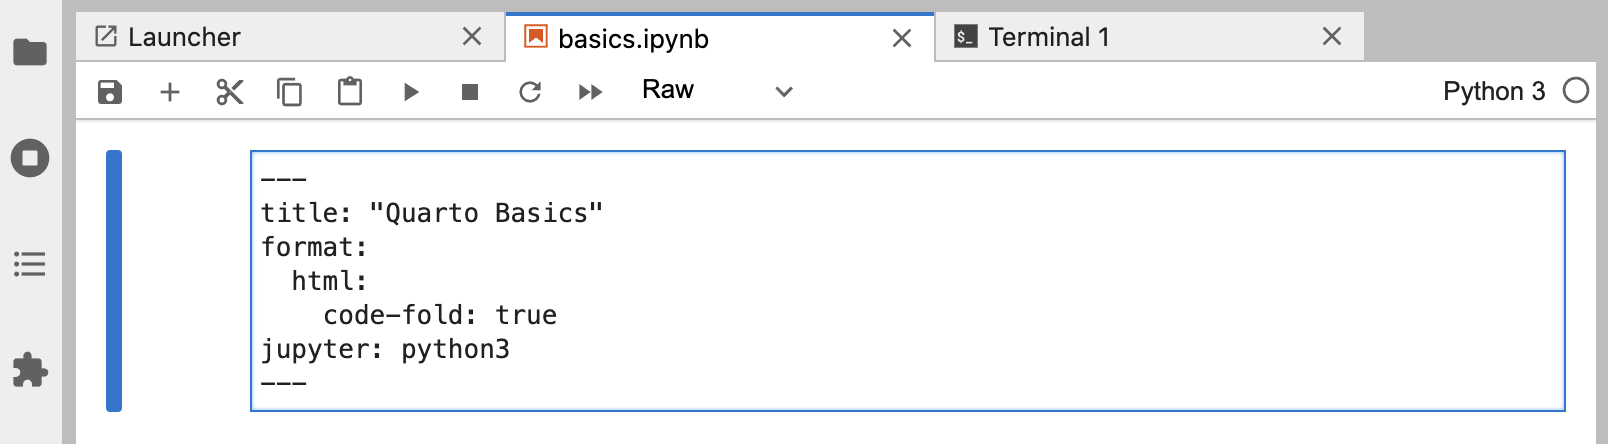 YAML of the notebook with the fields title, format, and jupyter. Title is set to Quarto Basics with title: "Quarto Basics". Format is defined as html in the next line, and within the html format, code-fold is set to true. Jupyter is set to python3 with jupyter: python3.